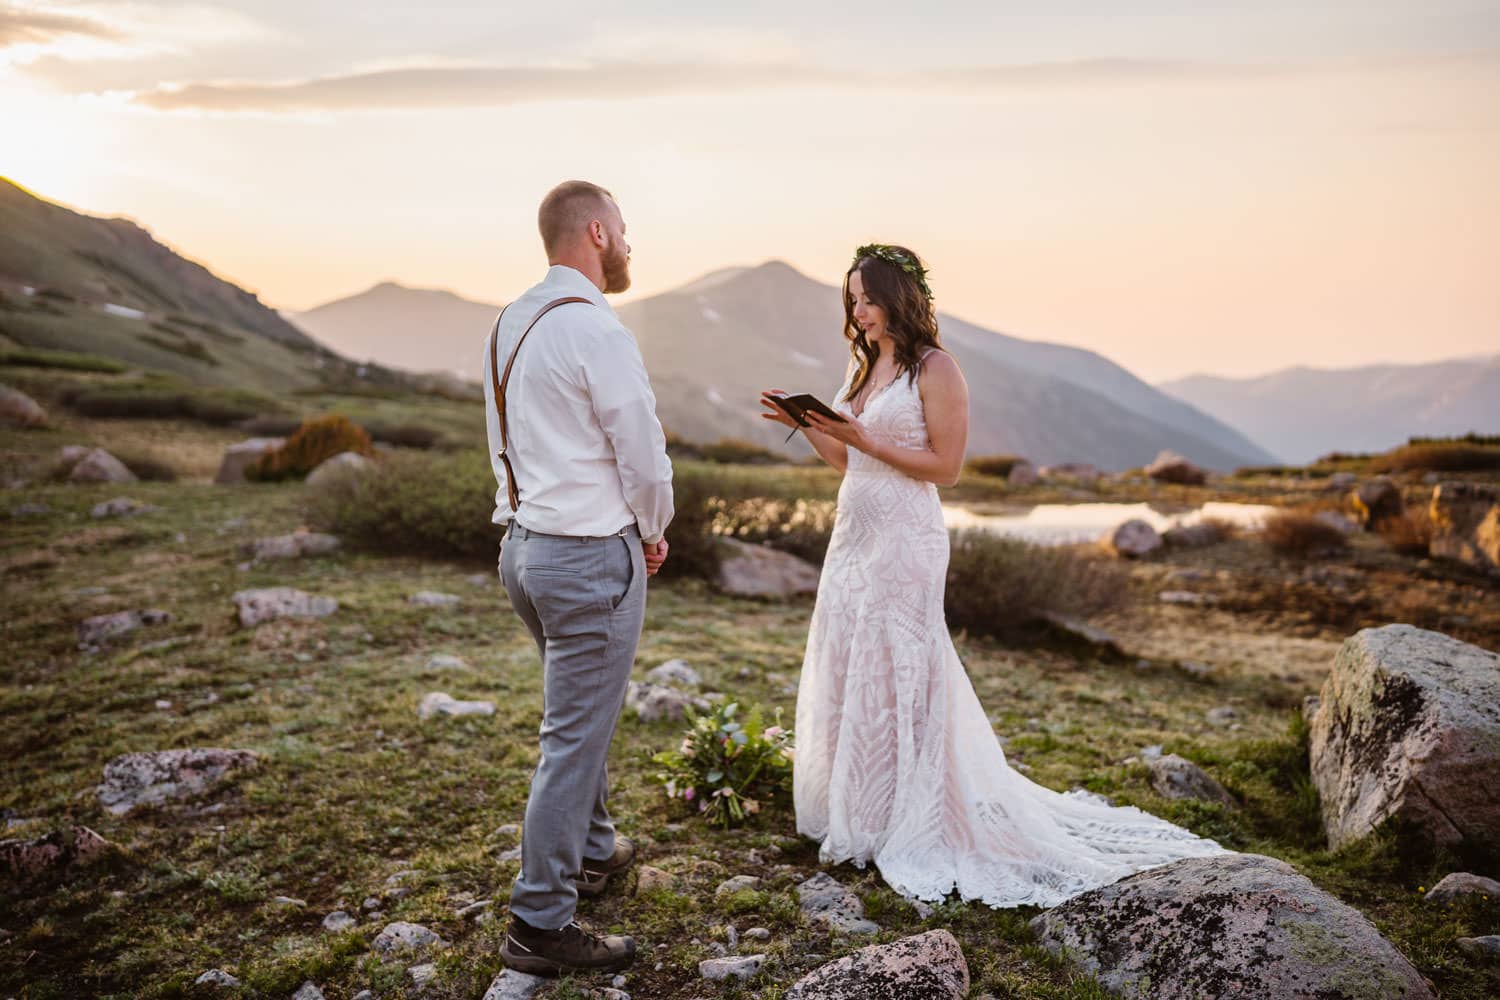 Bride and Groom Vow Ceremony at Sunrise Elopement in Colorado